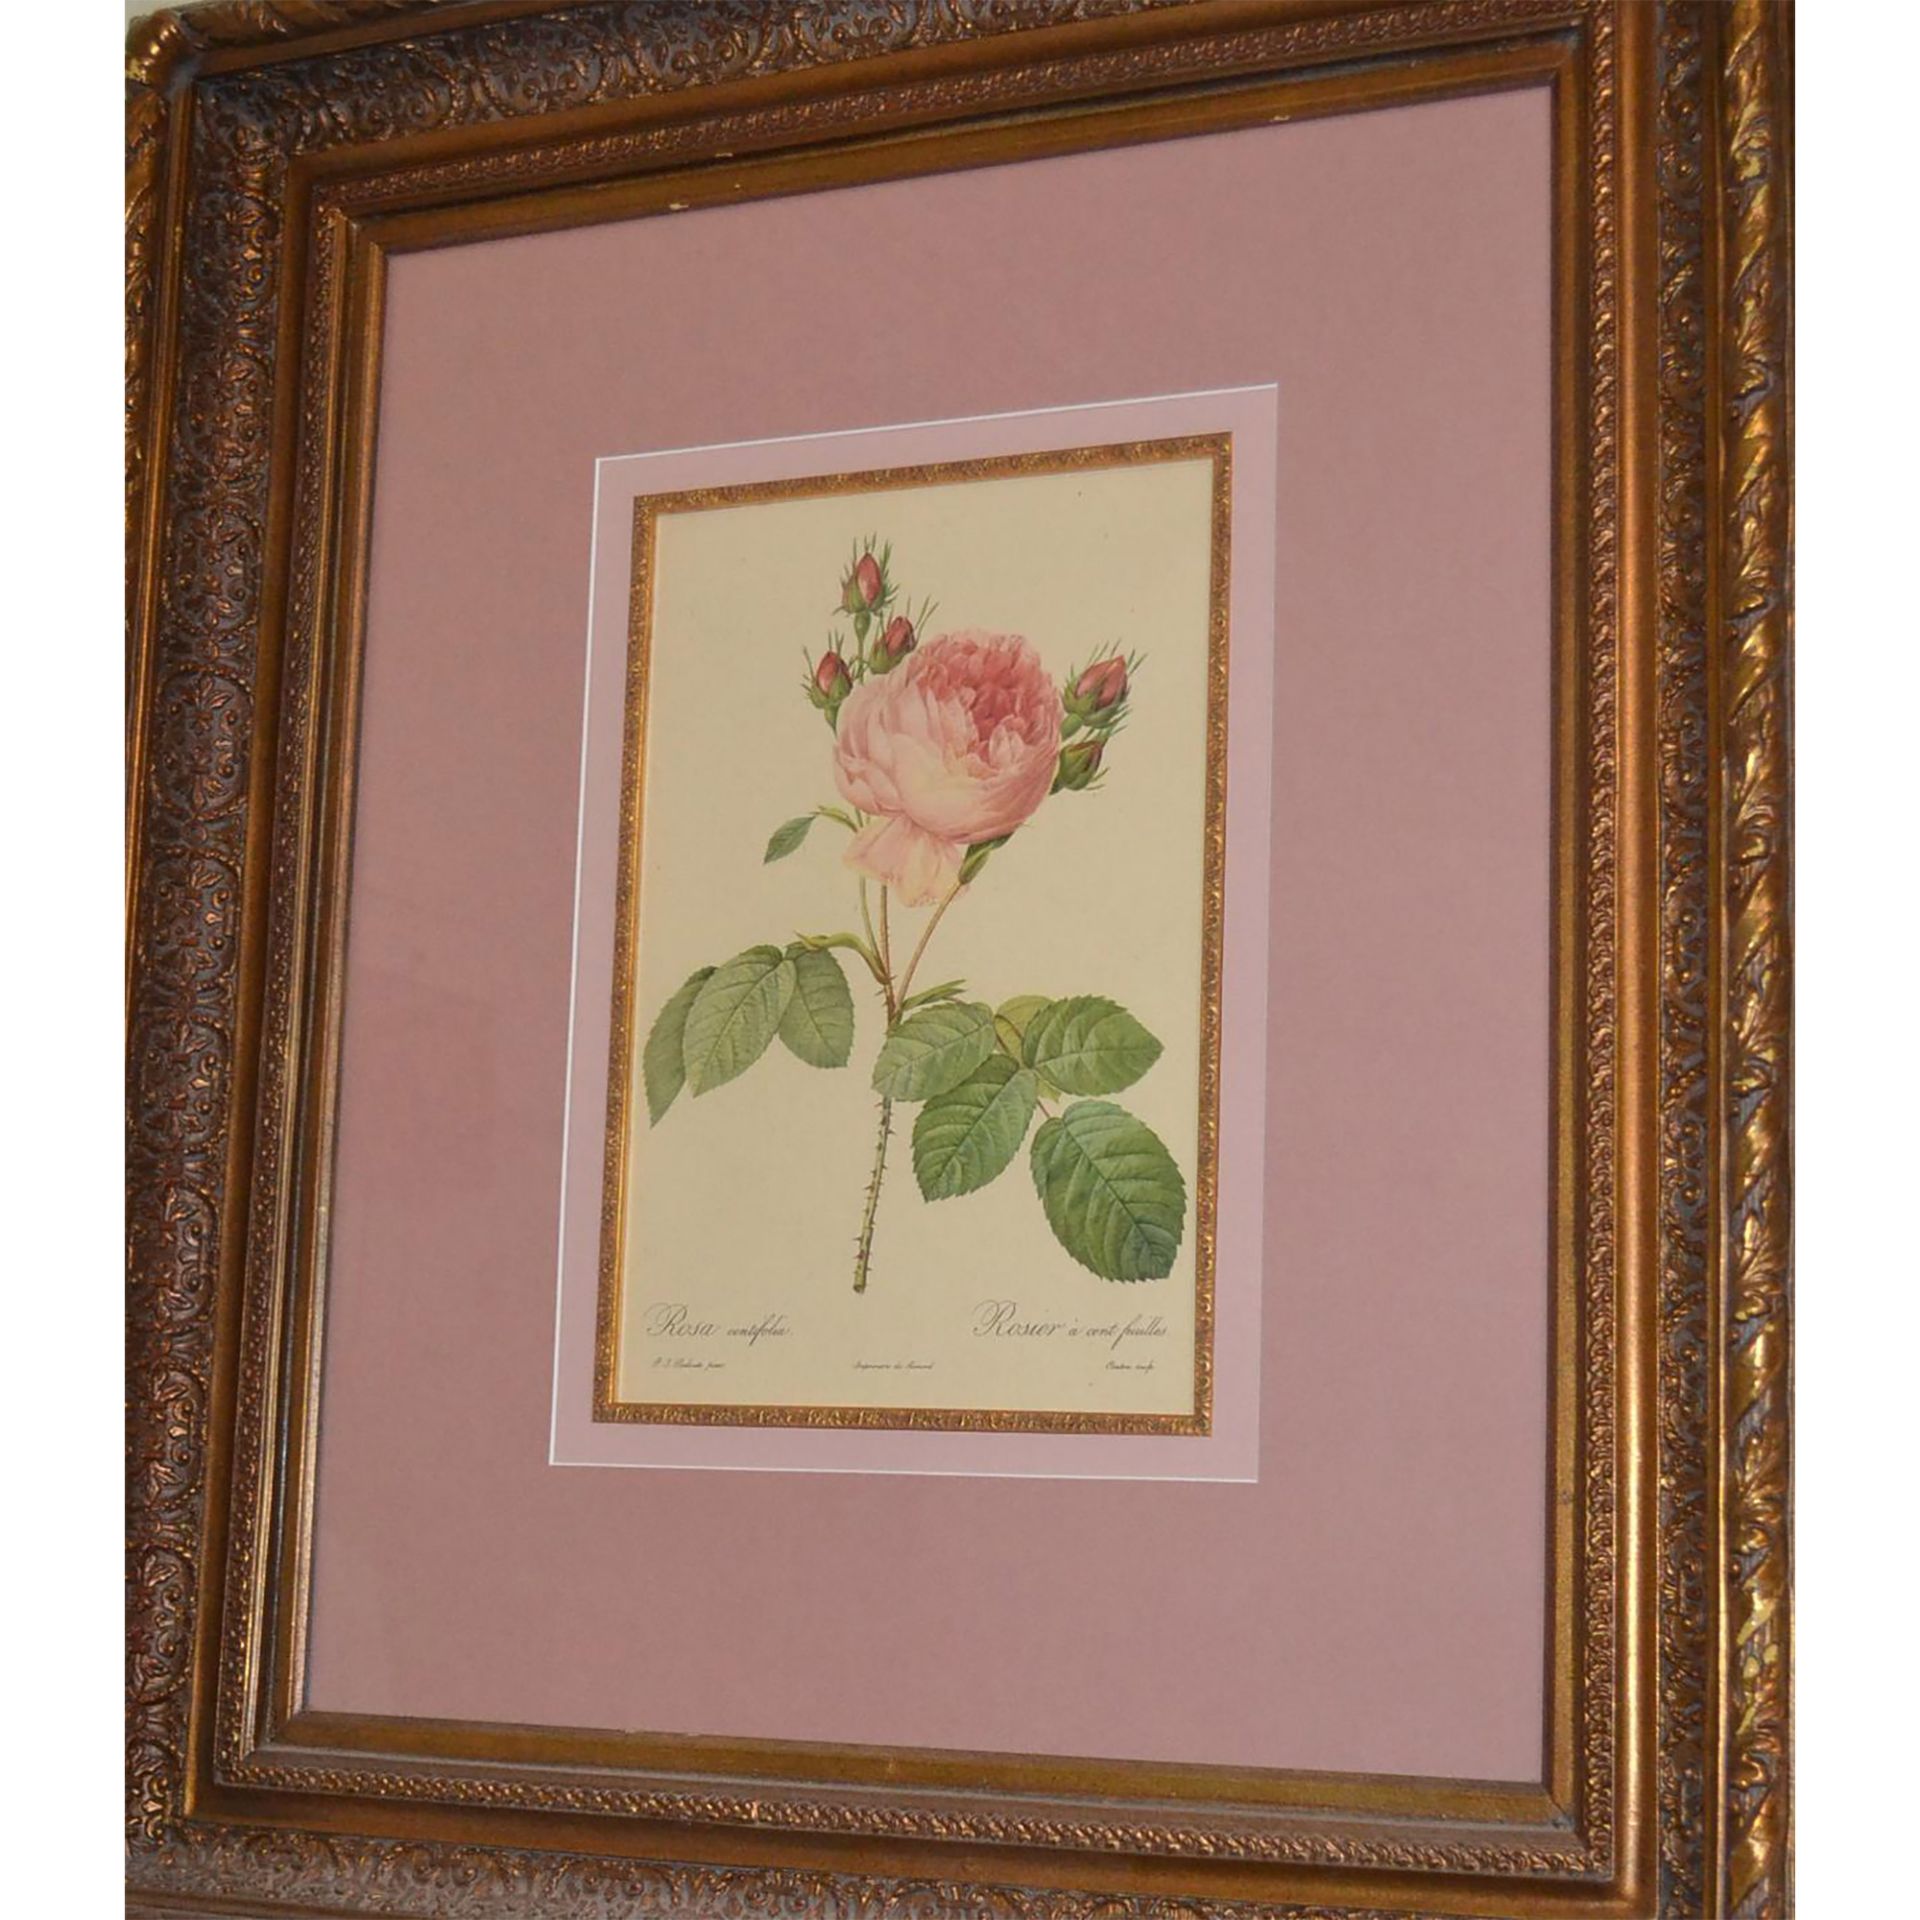 P.J. Redoute. Rosa Centifolia Rosier A Centfeuilles Pink Floral Engraving, Gold Ornate Frame - Image 2 of 2